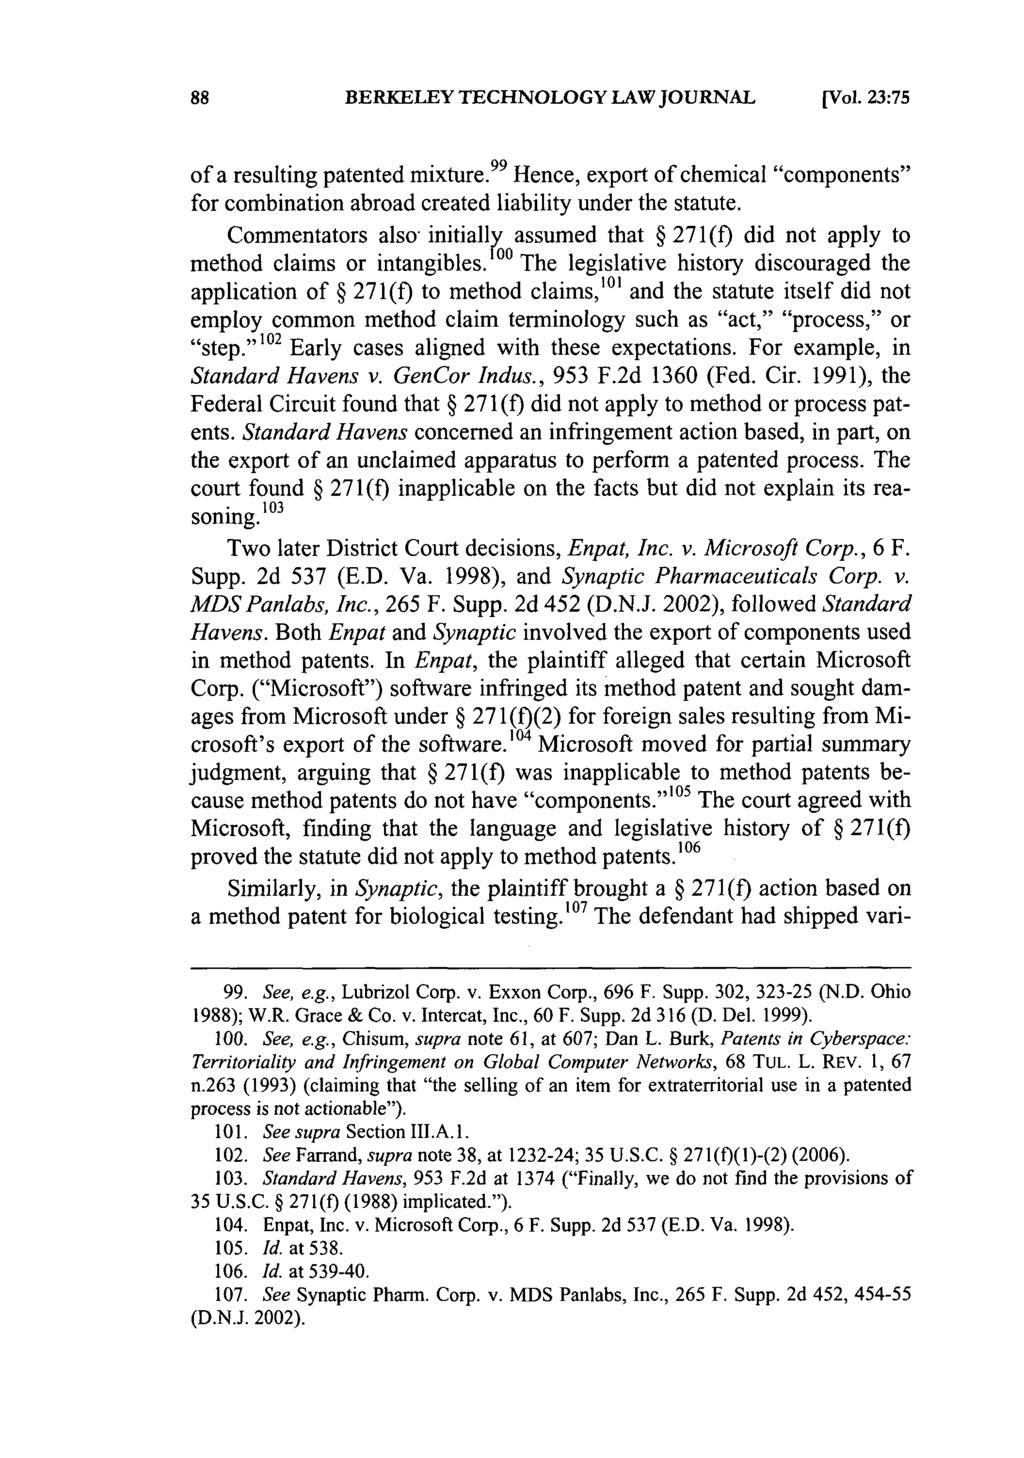 BERKELEY TECHNOLOGY LAW JOURNAL [Vol. 23:75 of a resulting patented mixture. 99 Hence, export of chemical "components" for combination abroad created liability under the statute.